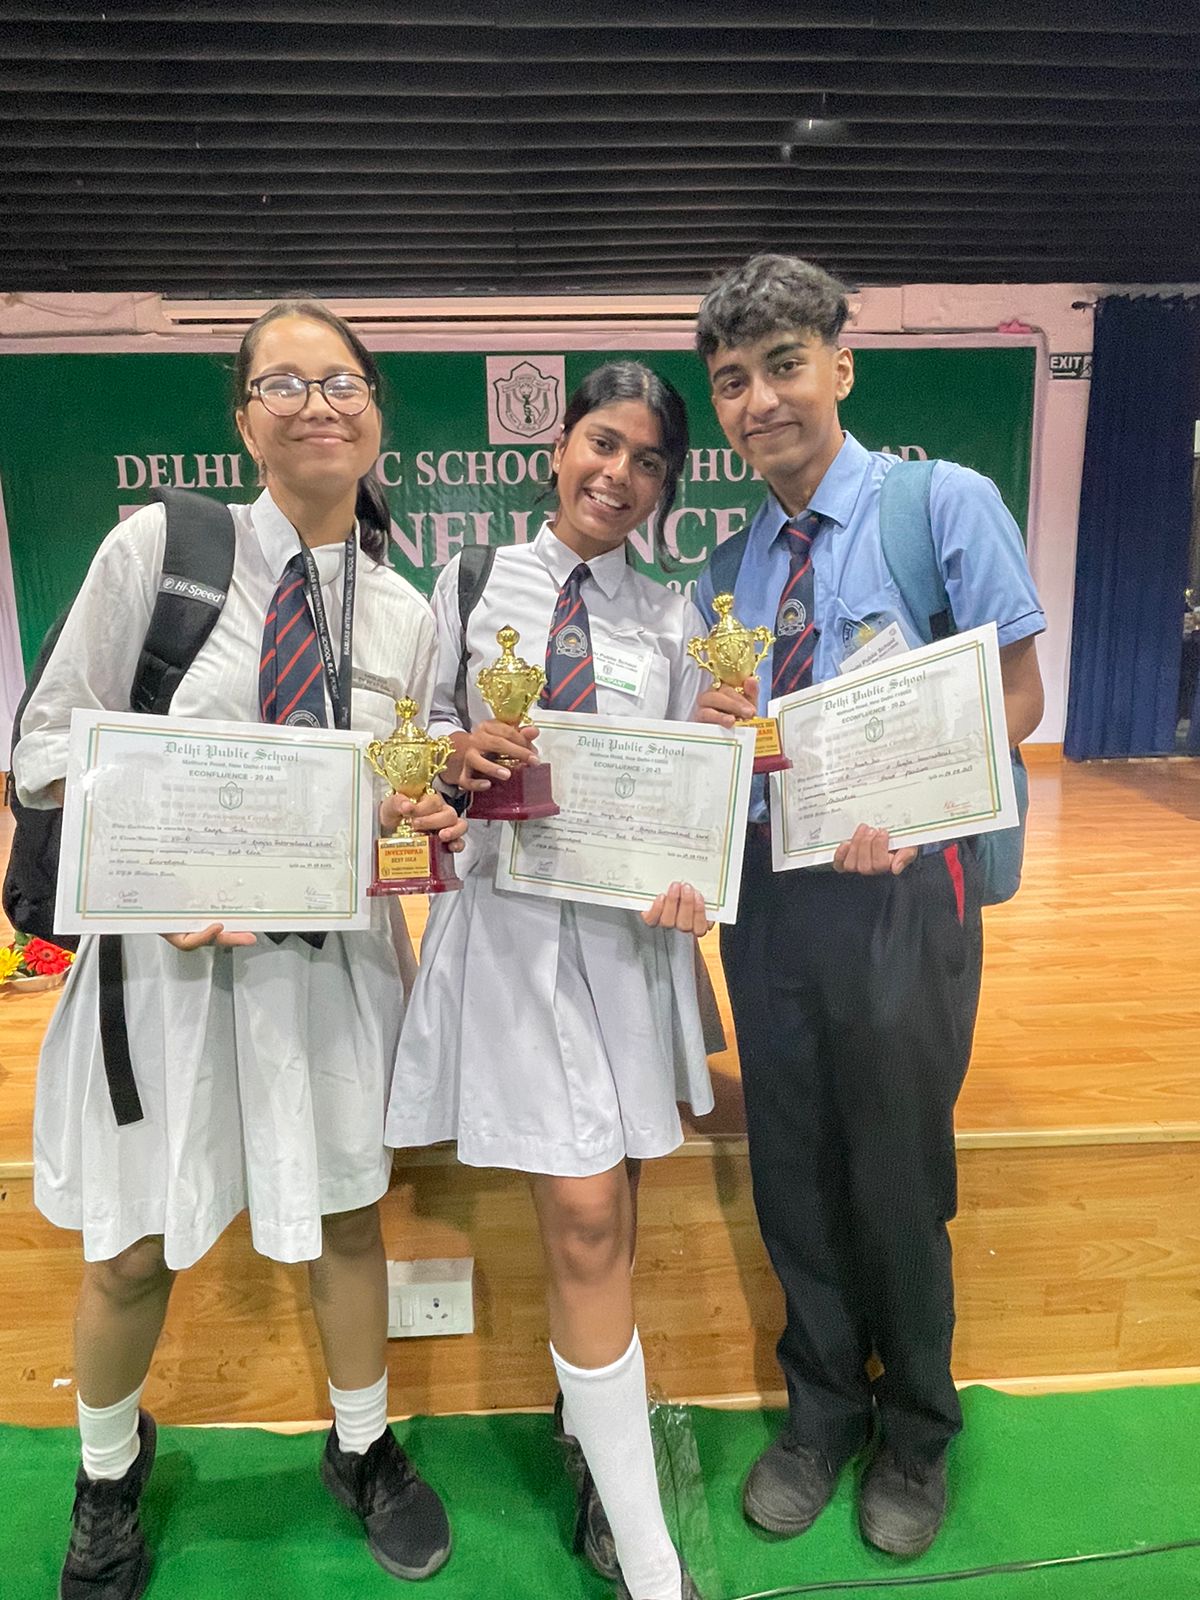 “Ramjas International School Shines: Kavya and Navya Secure First Prize in Investopad’s Best Idea Pitching, Aneesh Das Grabs Third Prize in Chitrakari at DPS Mathura Road”